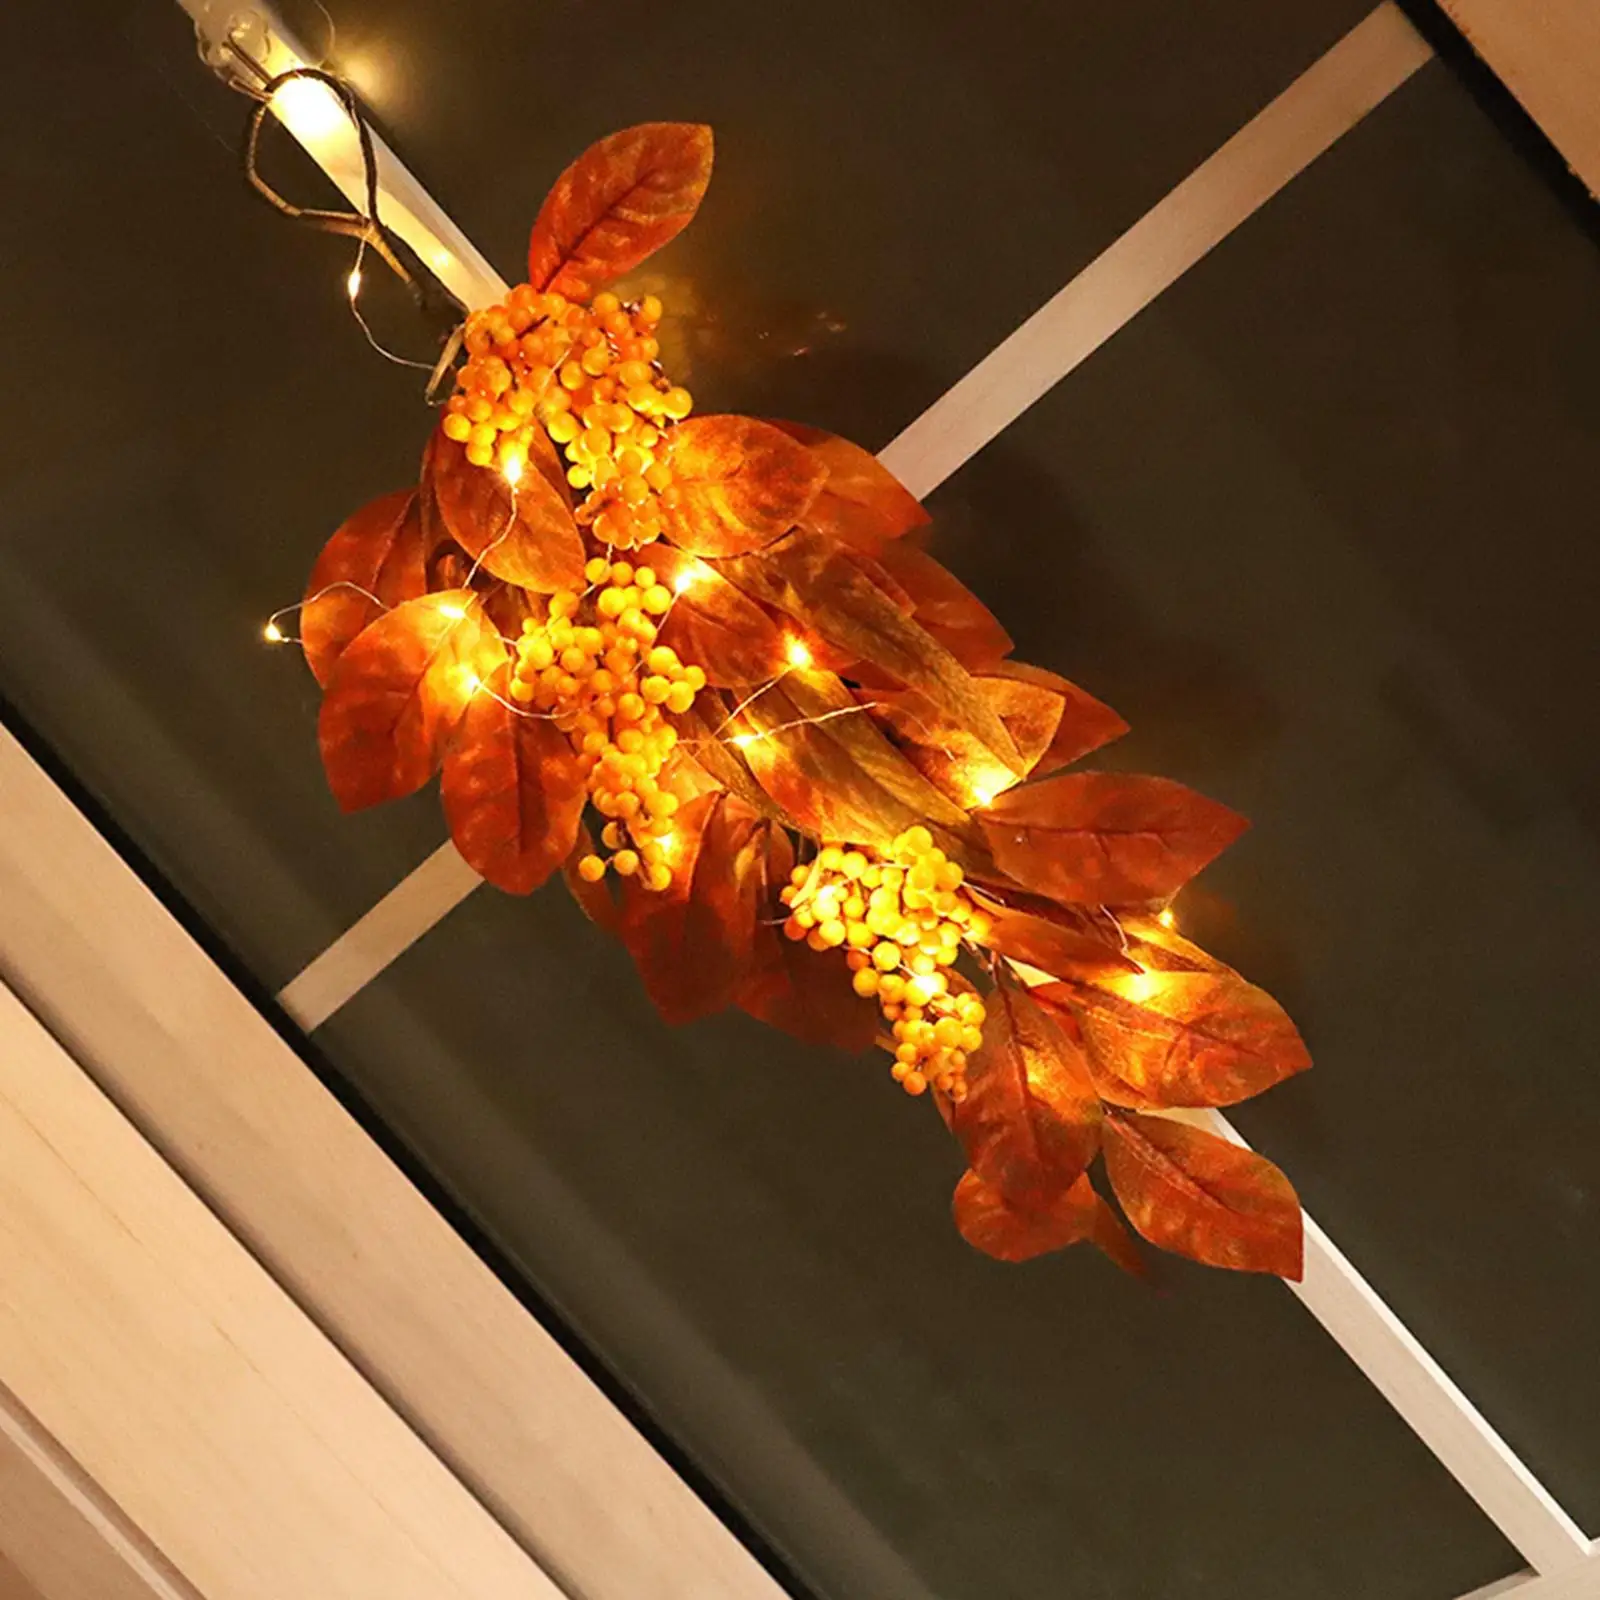 Hanging Fall Teardrop Swag 45cm House Garland Artificial Decorative Swag for Wedding Fall Branches door Decorative